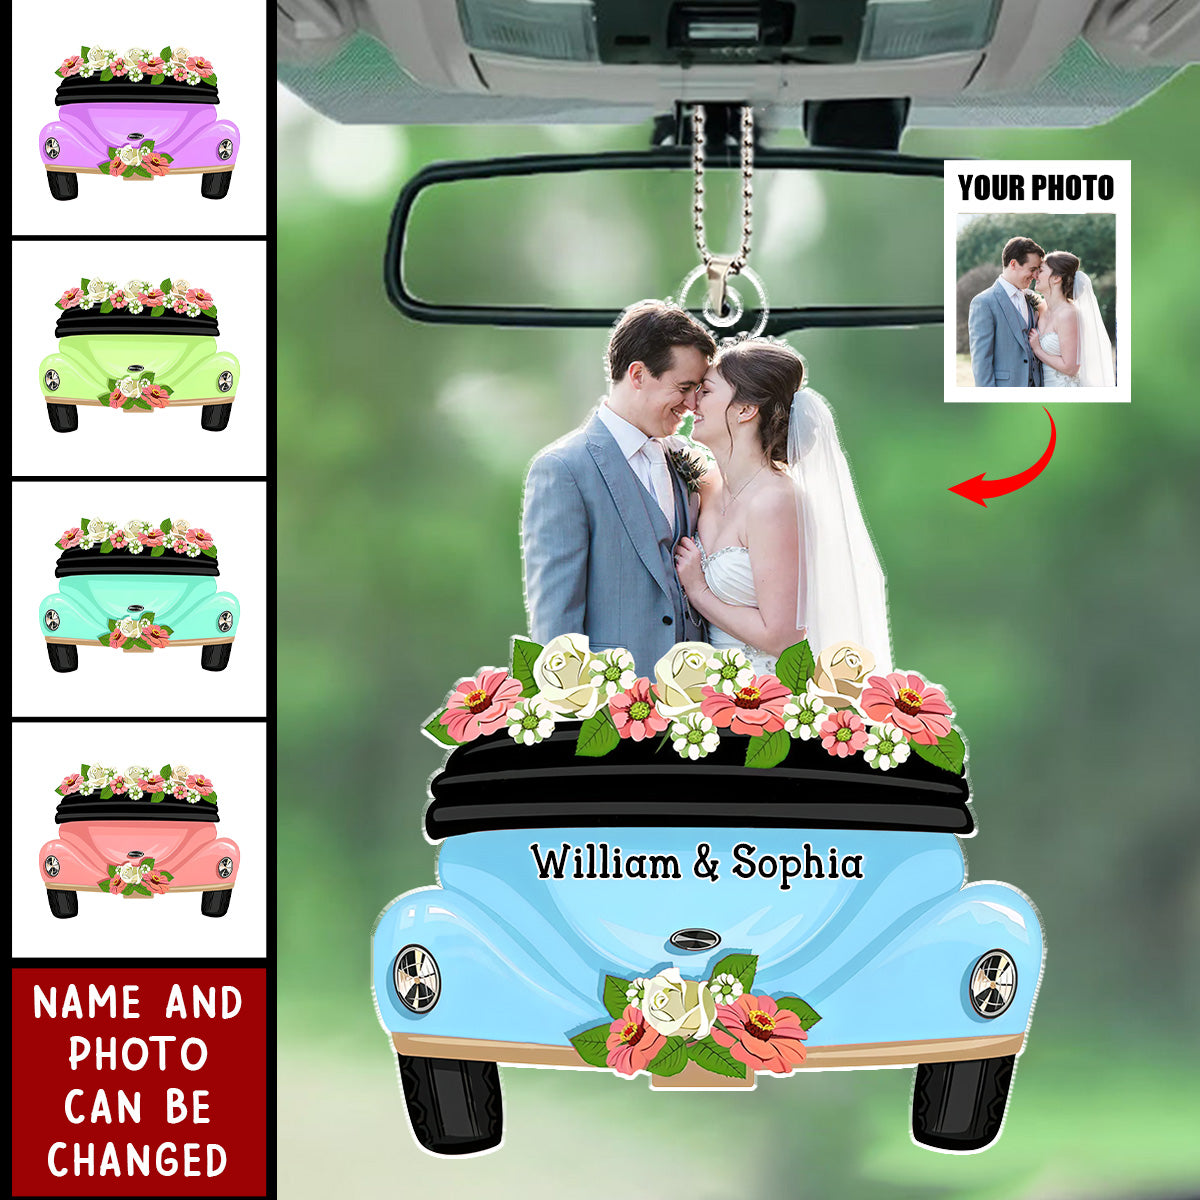 Personalized Acrylic Car Ornament - Wedding Anniversary Gift - Upload Photo - Gift For Husband Wife